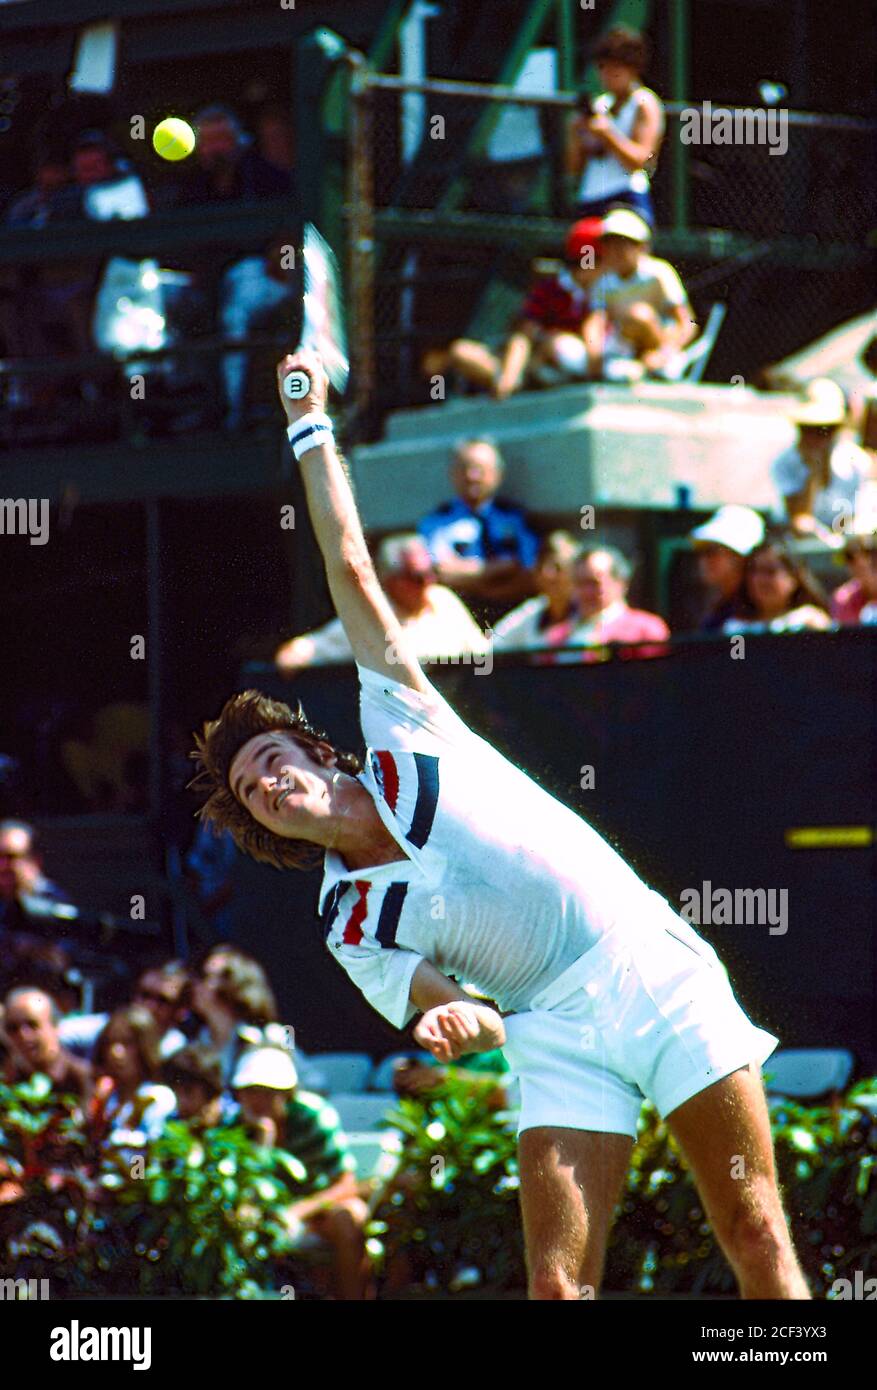 Jimmy Connors (USA) competing at the 1977 US Open Tennis. Stock Photo